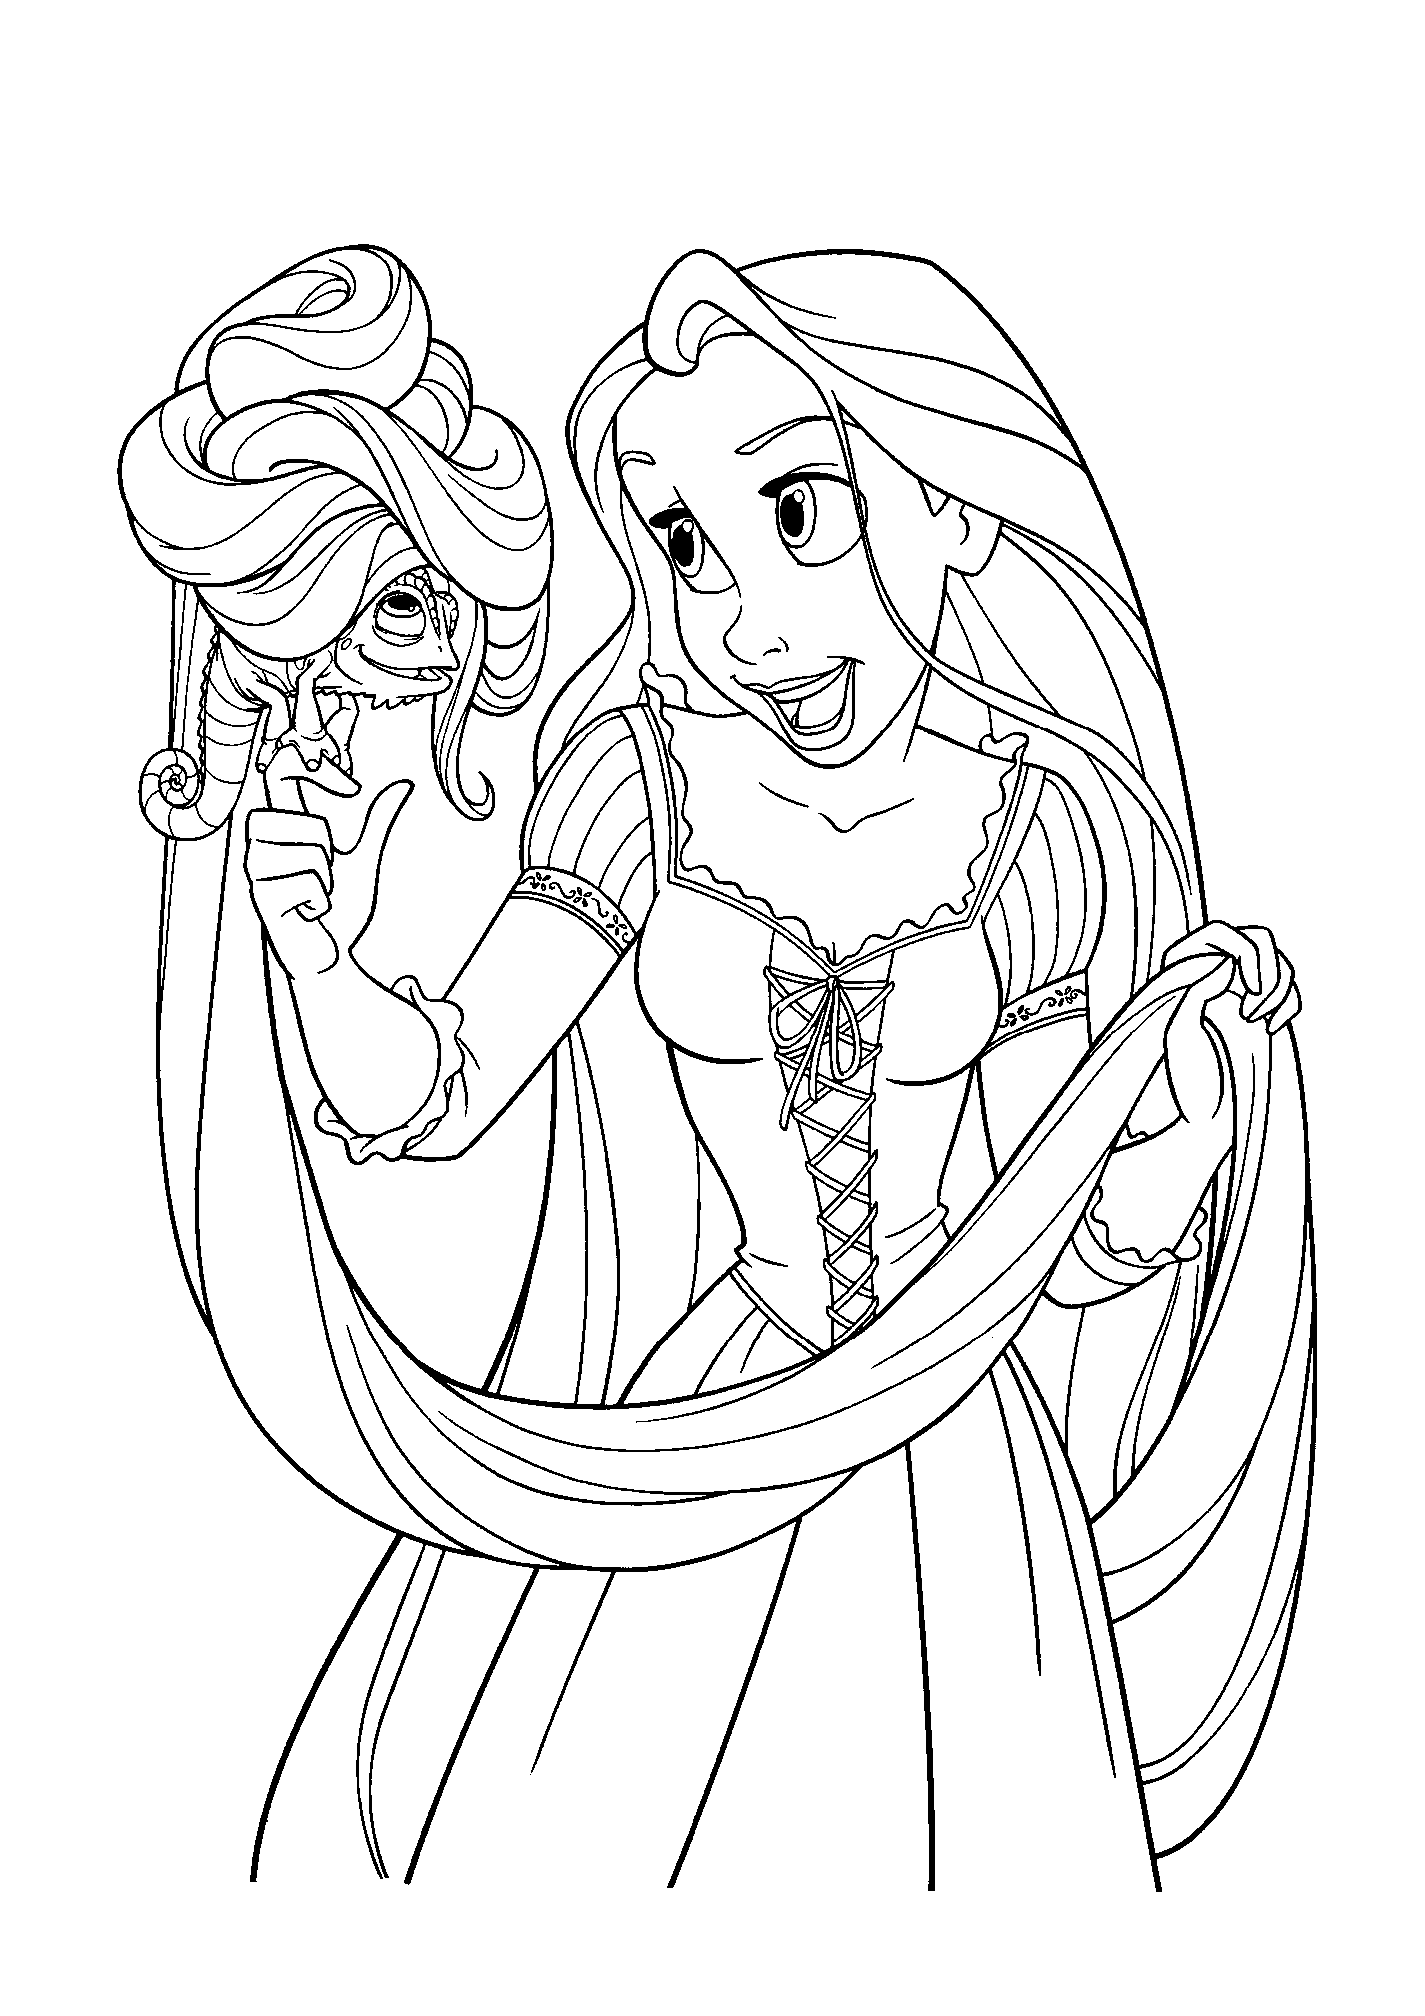 Printable Tangled Coloring Page of Princess Rapunzel Playing with her and Pascal the Chameleon